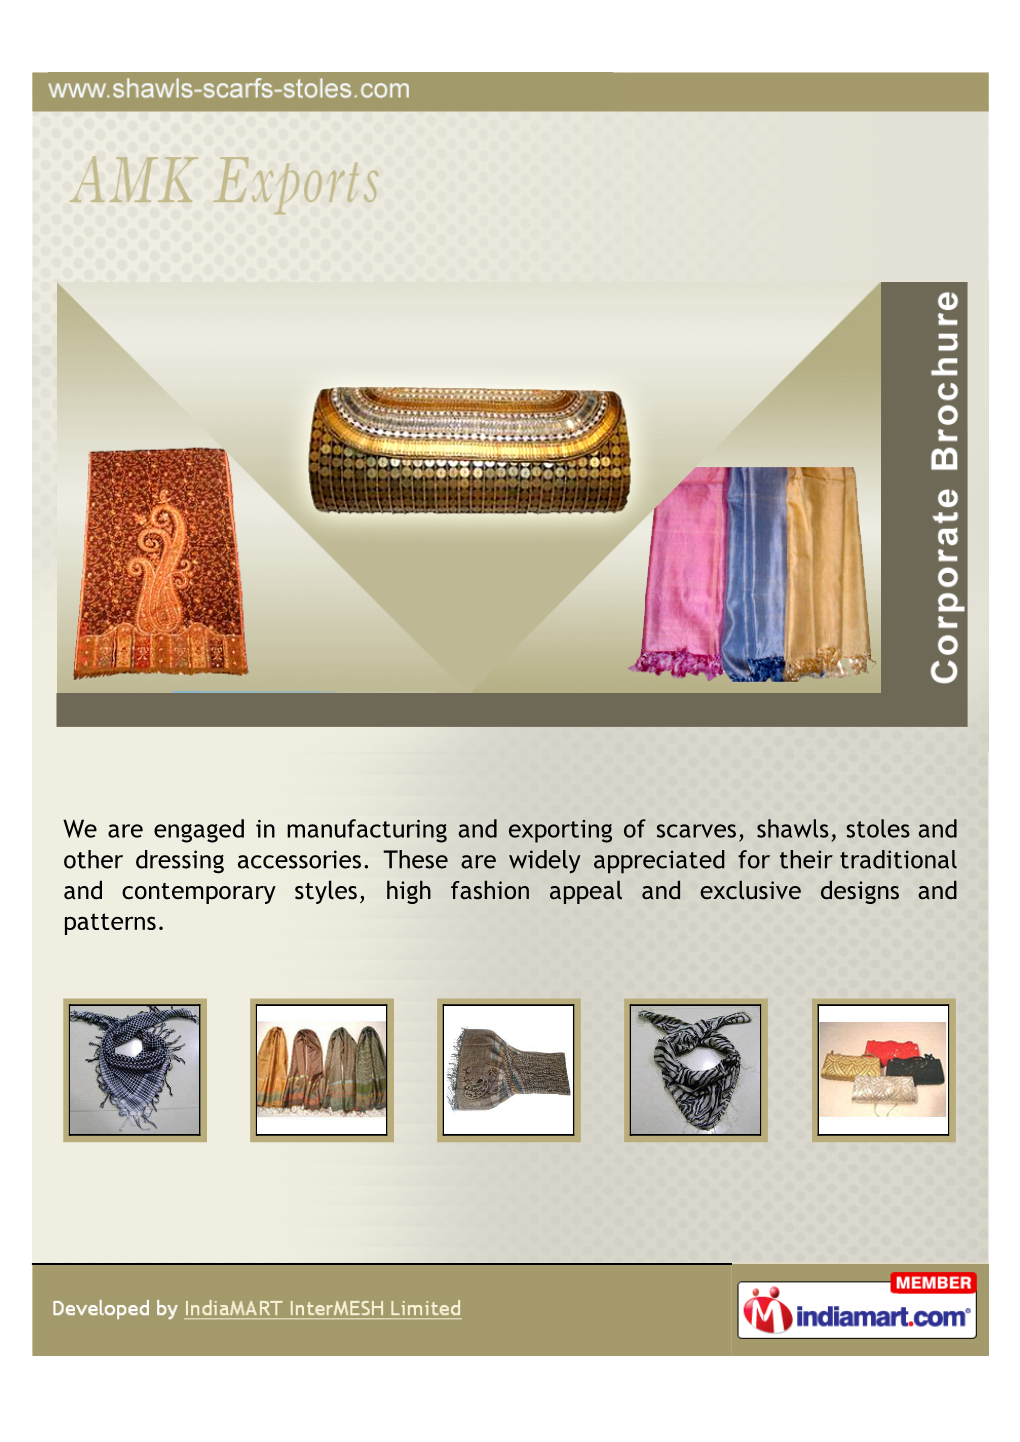 We Are Engaged in Manufacturing and Exporting of Scarves, Shawls, Stoles and Other Dressing Accessories